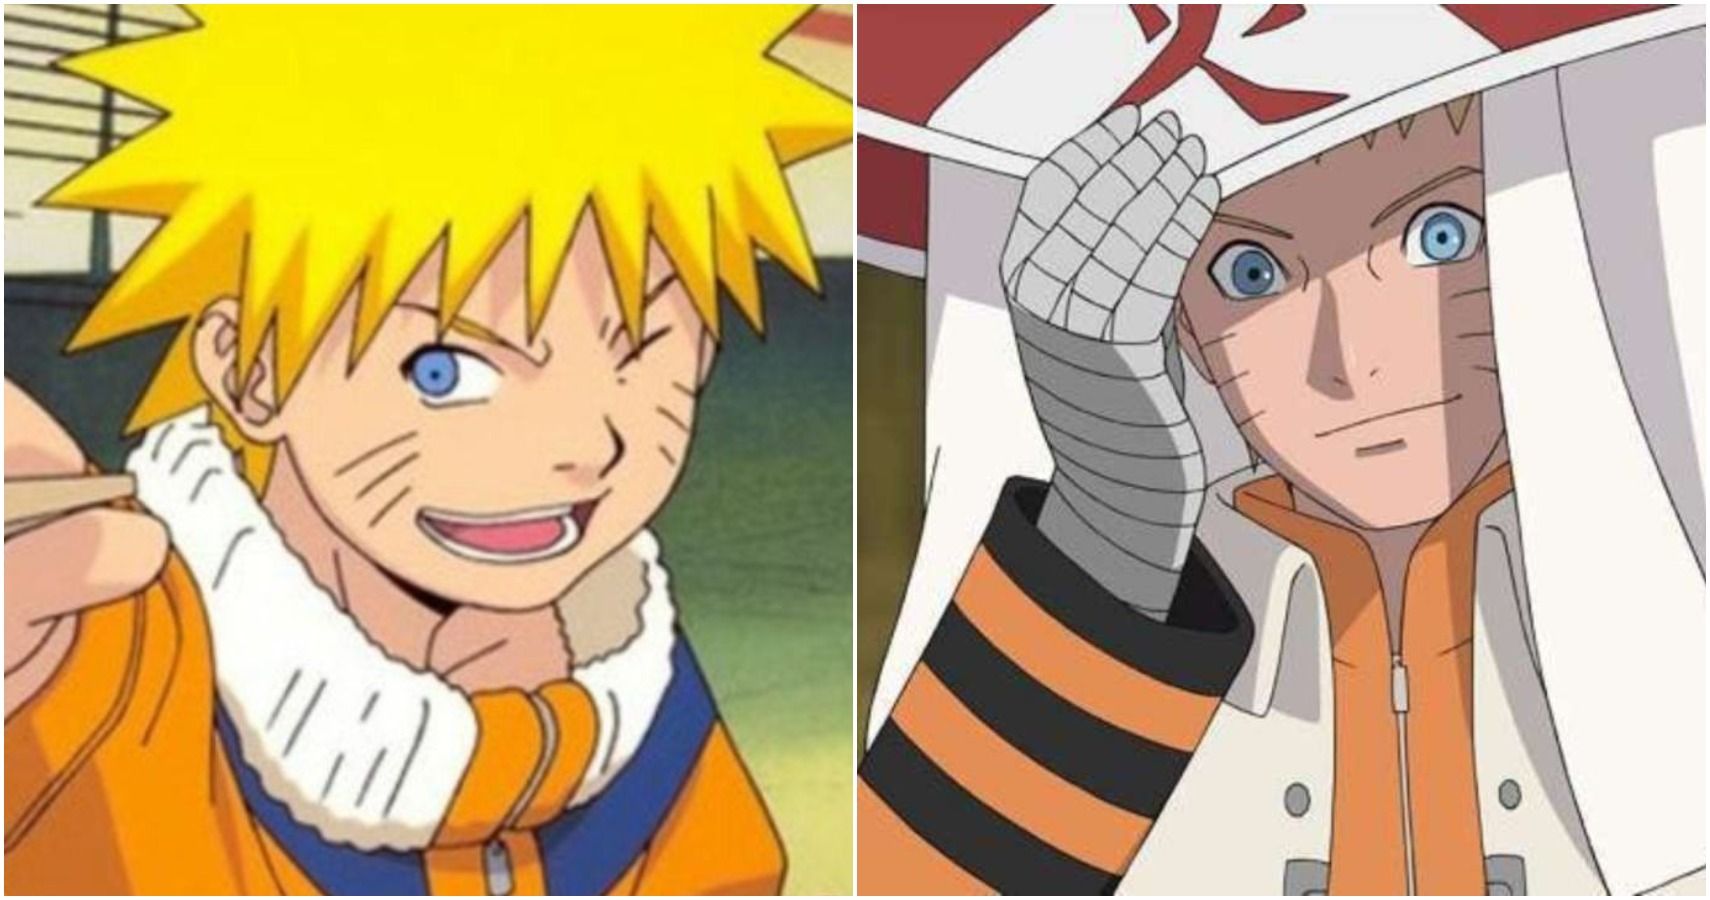 Naruto: 10 Ways The Anime Has Changed Over The Years